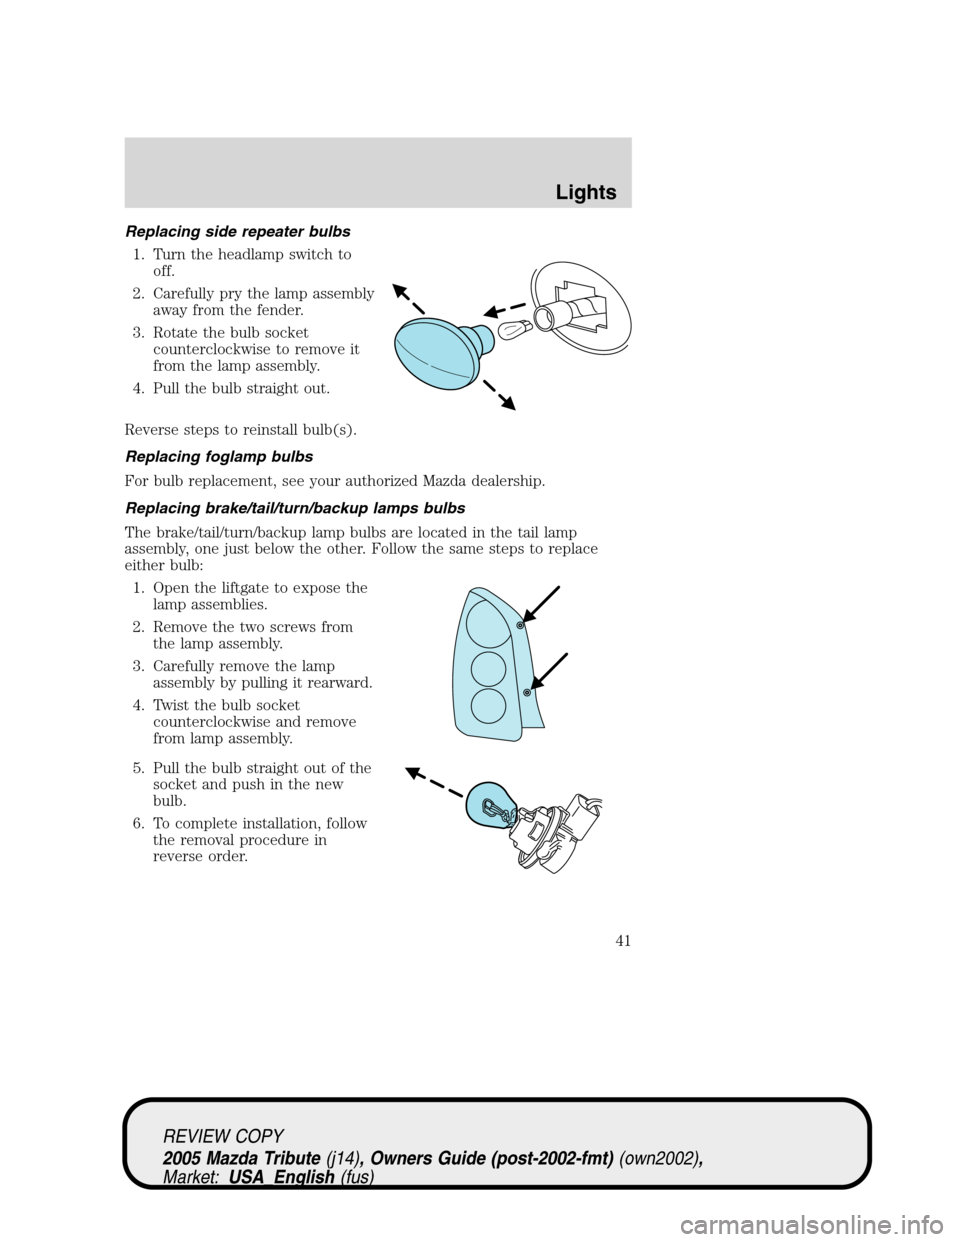 MAZDA MODEL TRIBUTE 2005  Owners Manual (in English) Replacing side repeater bulbs
1. Turn the headlamp switch to
off.
2. Carefully pry the lamp assembly
away from the fender.
3. Rotate the bulb socket
counterclockwise to remove it
from the lamp assembl